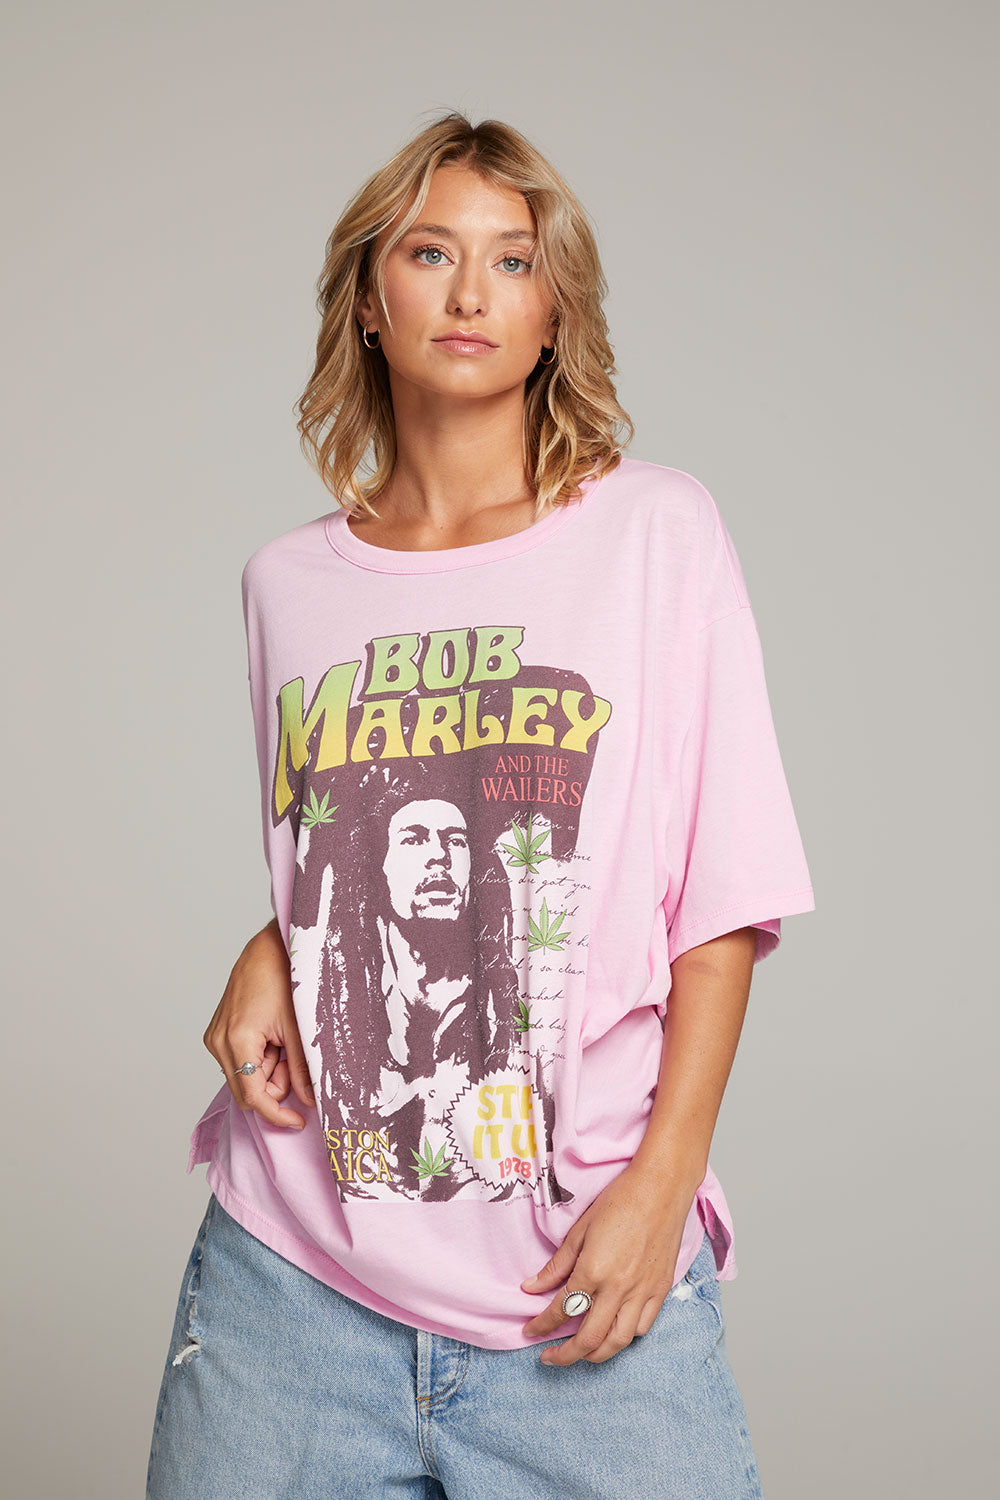 Bob Marley Stir It Up One Size Tee WOMENS chaserbrand